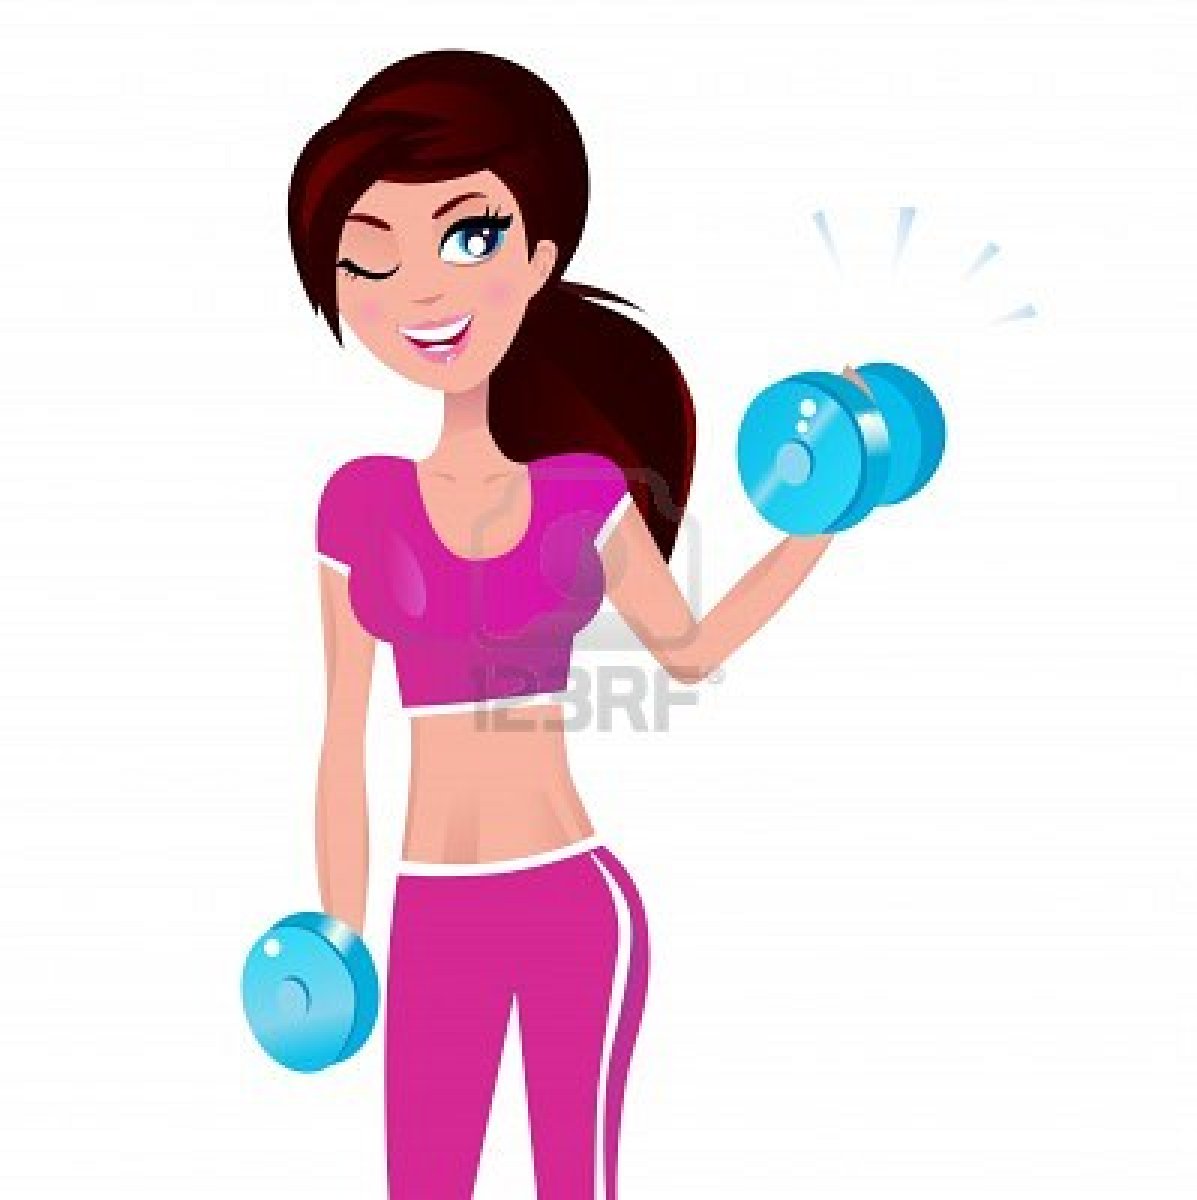 clipart of girl exercising - photo #32